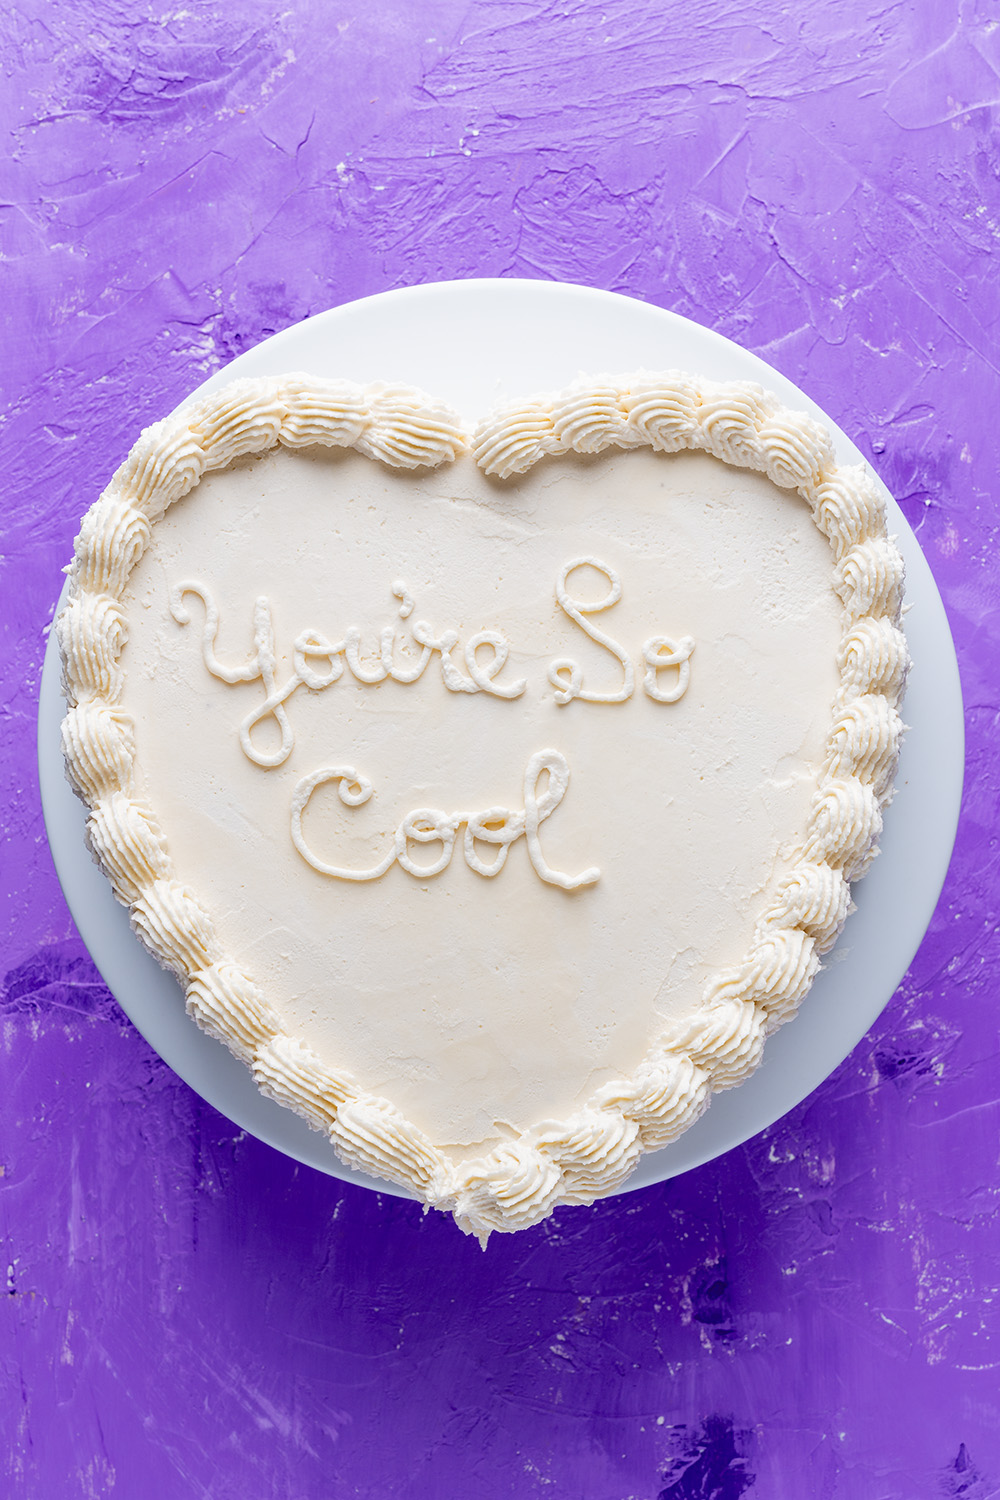 white anniversary heart cake with You're So Cool written on it.